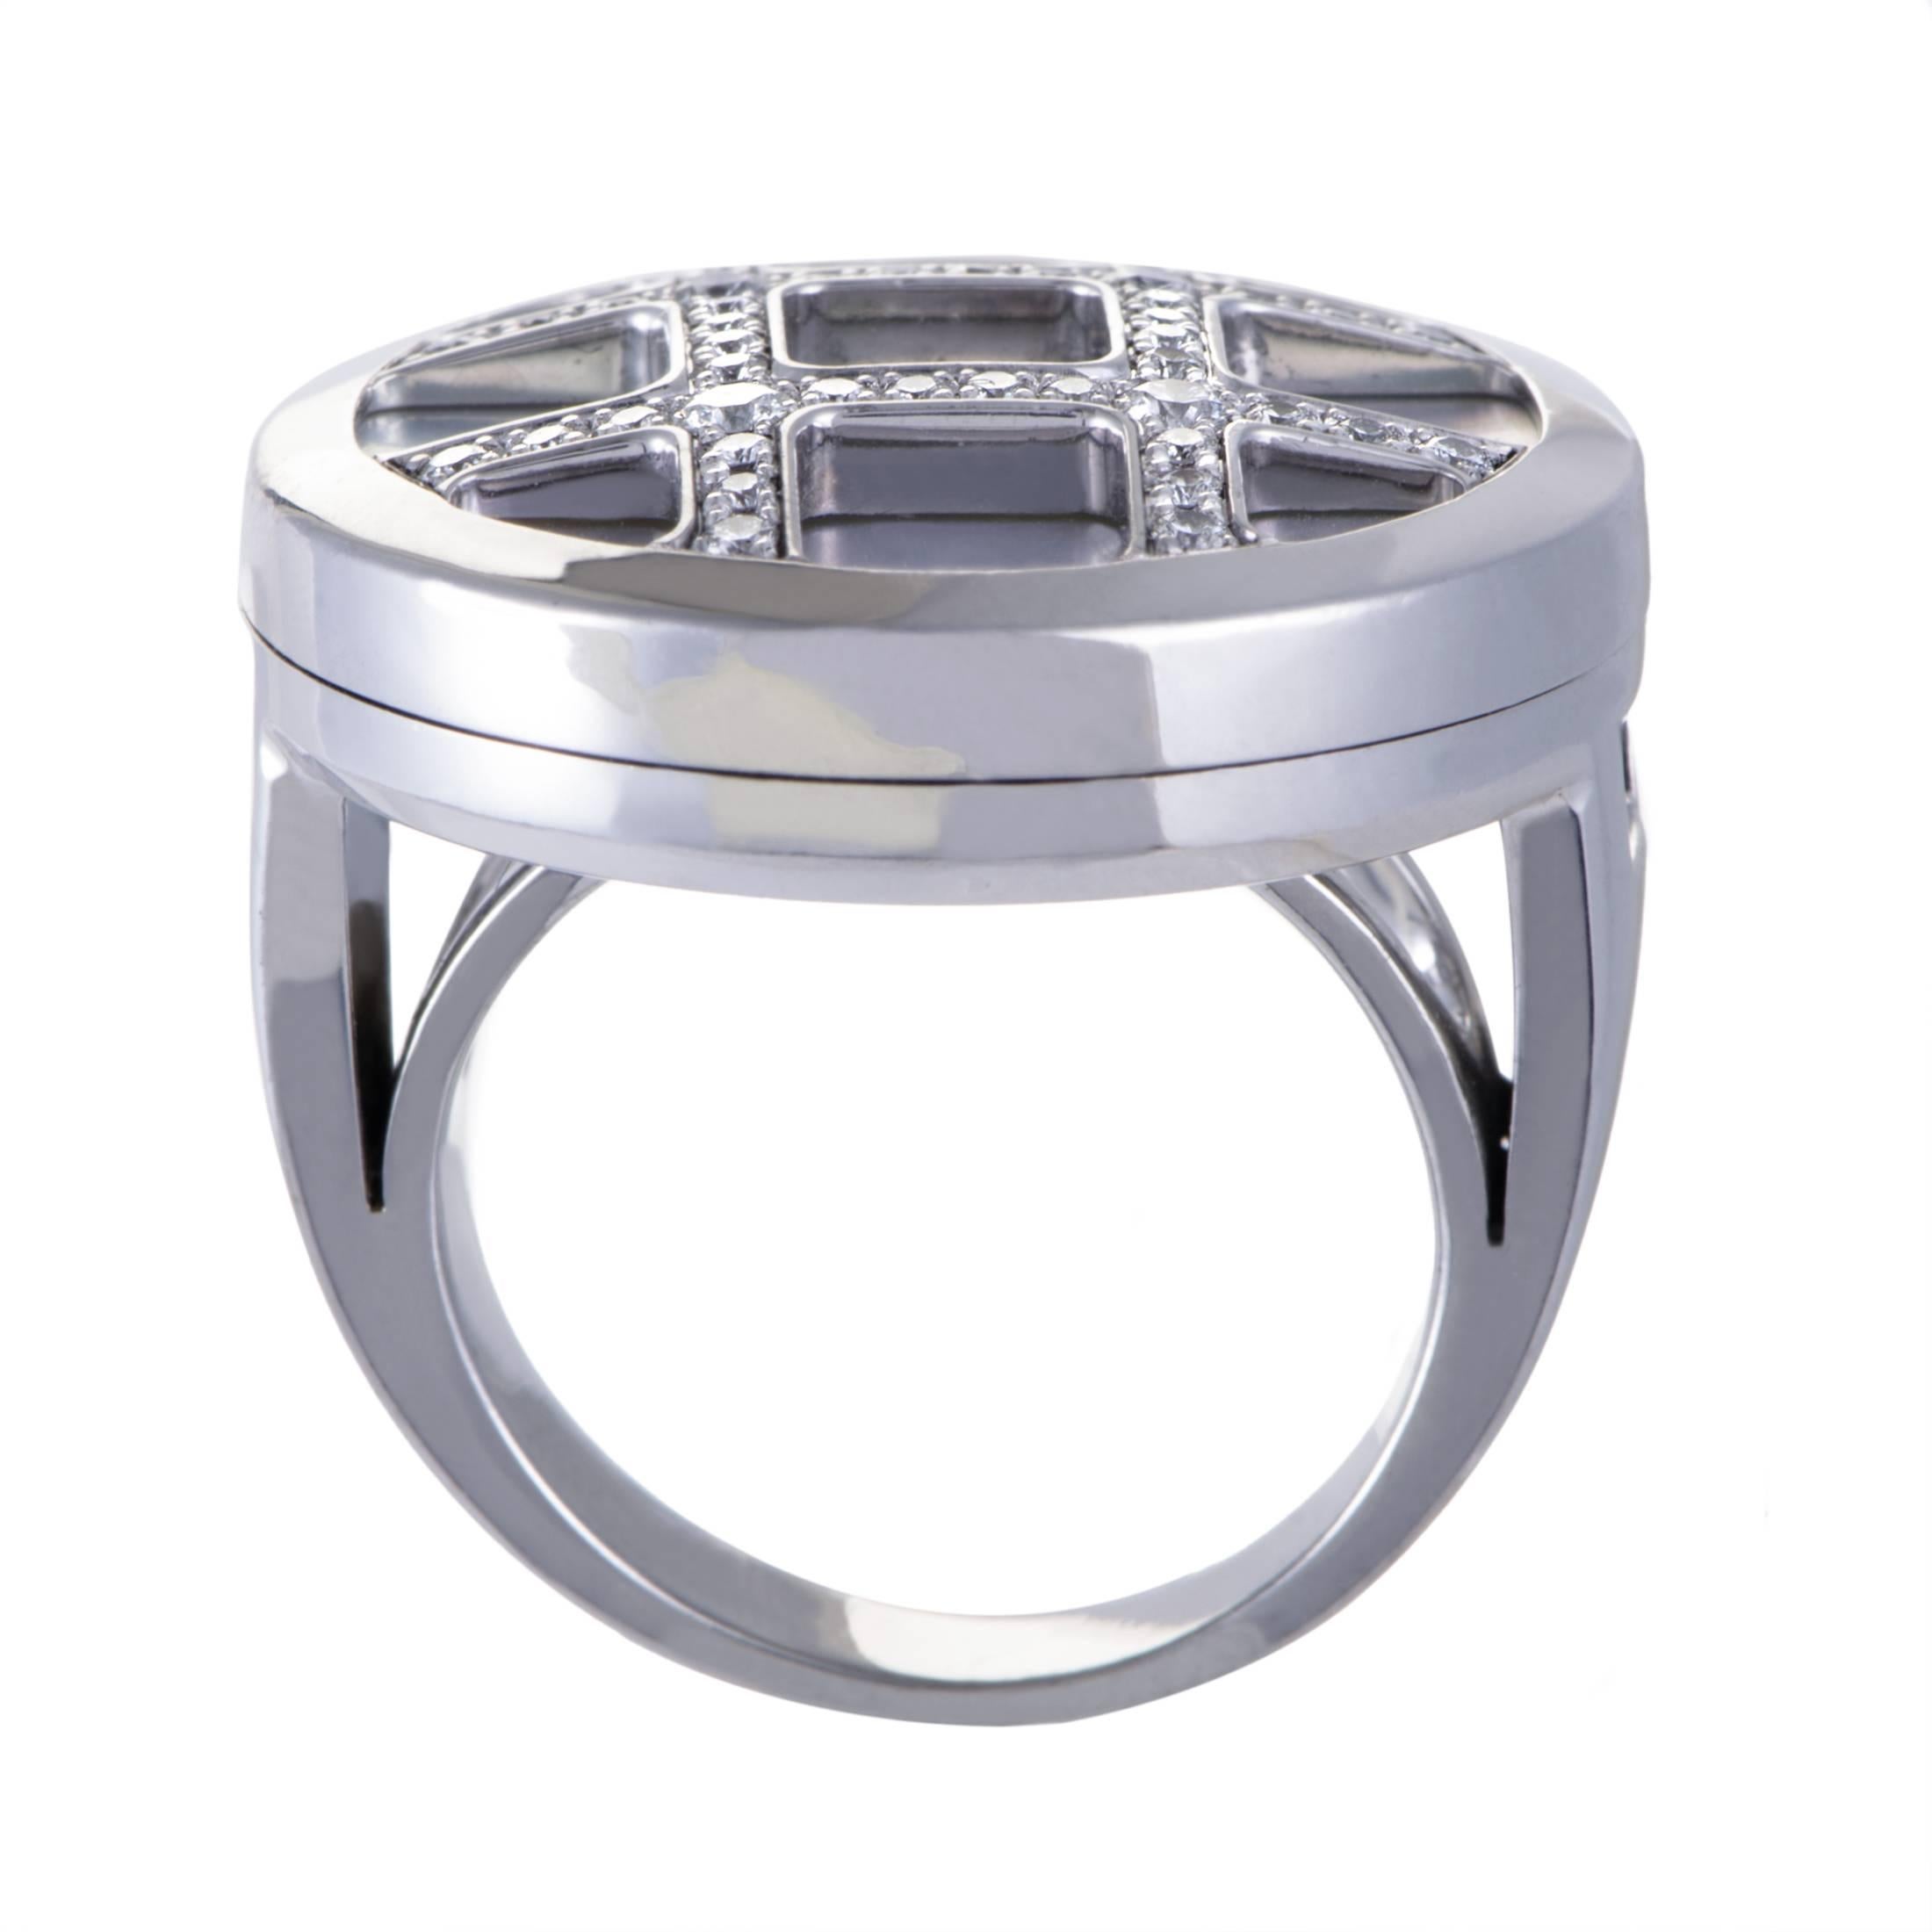 Wonderful diamonds shine in neat pattern against the delightful mother of pearl in this astonishing ring from Cartier which is made of prestigious 18K white gold and boasts a shape that compels with its offbeat idea and impeccable crafting.Ring Top